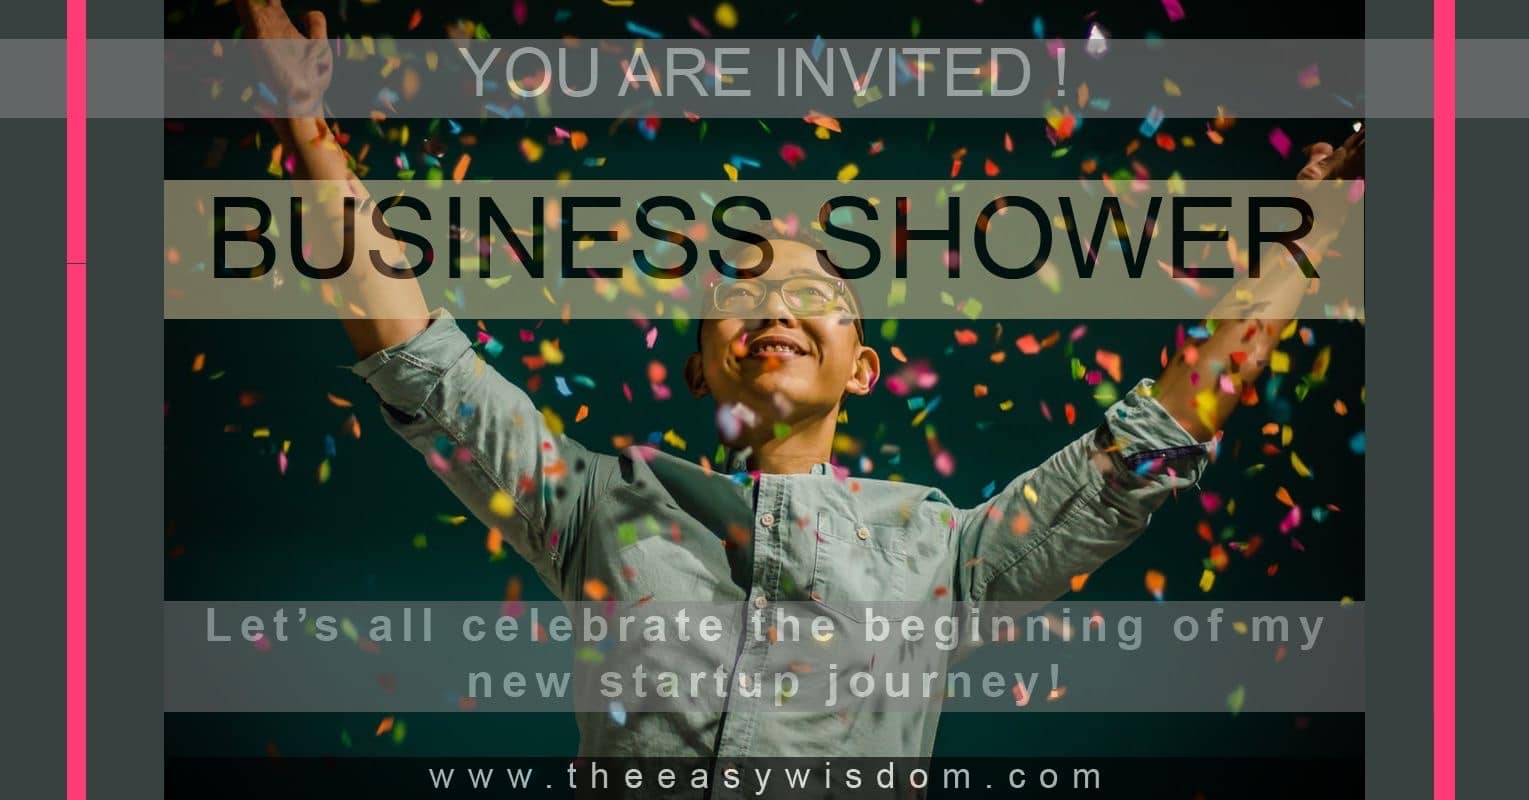 Business Shower Ideas To Celebrate Your Startup Journey- www.theeasywisdom.com